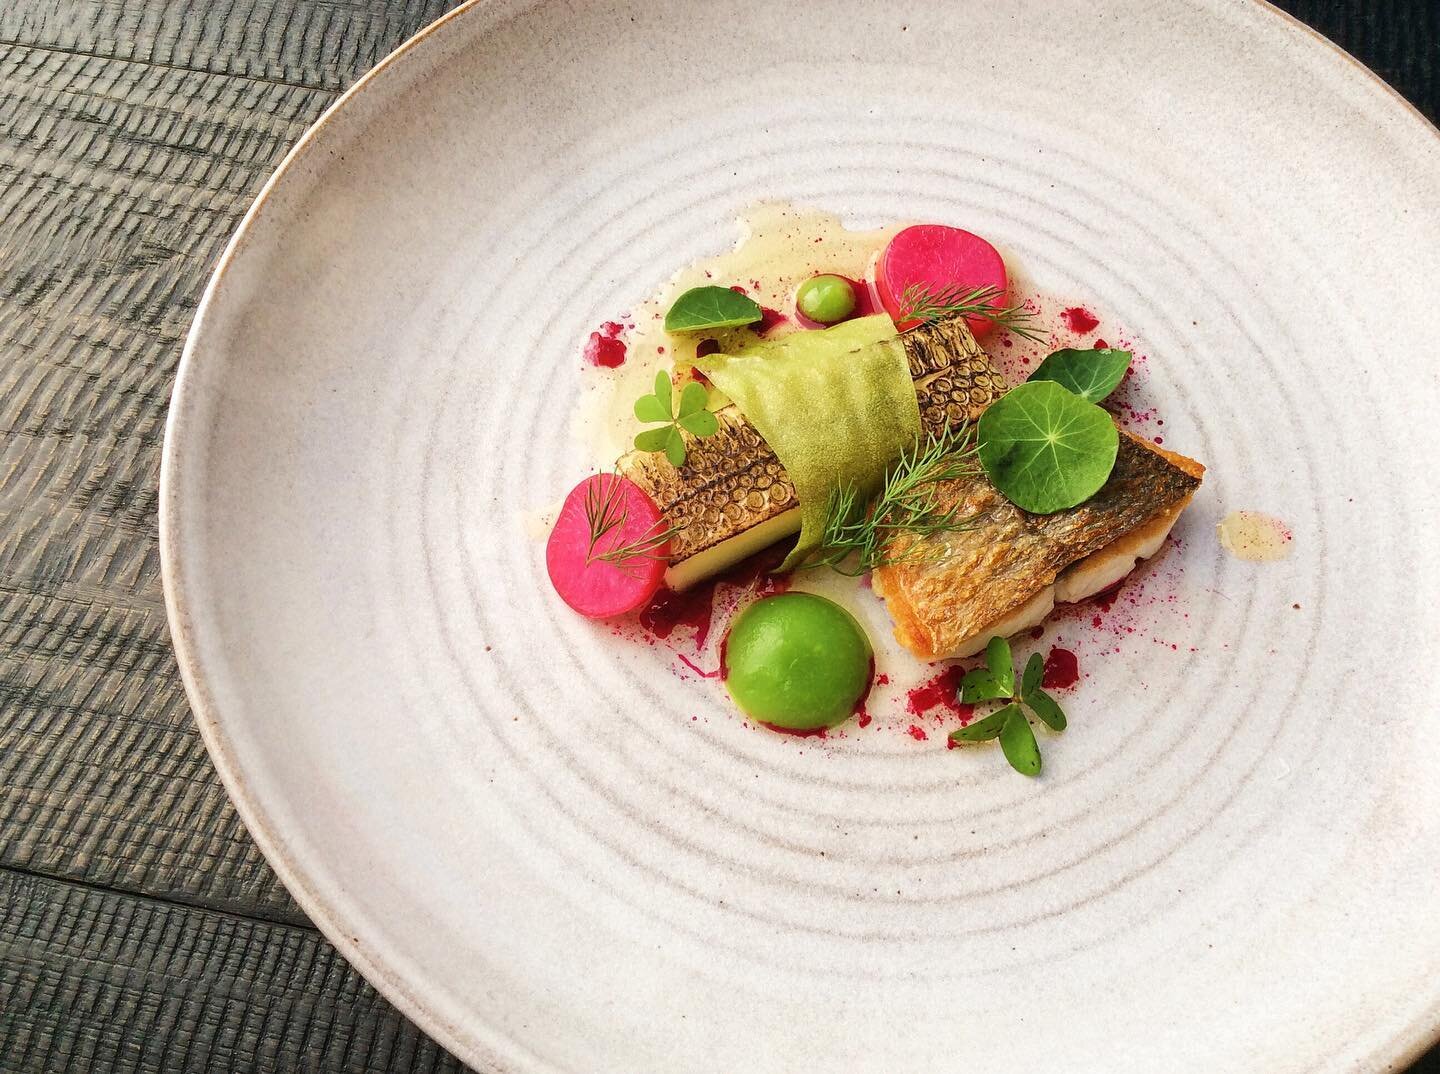 Throw Back to Dorada... 
Panfried sea bream, pickled and torched cucumber, apple sheet, apple pur&eacute;e, beetroot pickled radish, beetroot radish dressing, garden herbs 🌿 
- 
- 
#tbt #dorada #seabream #apple #radish #1 #privatechef #soller #mallo